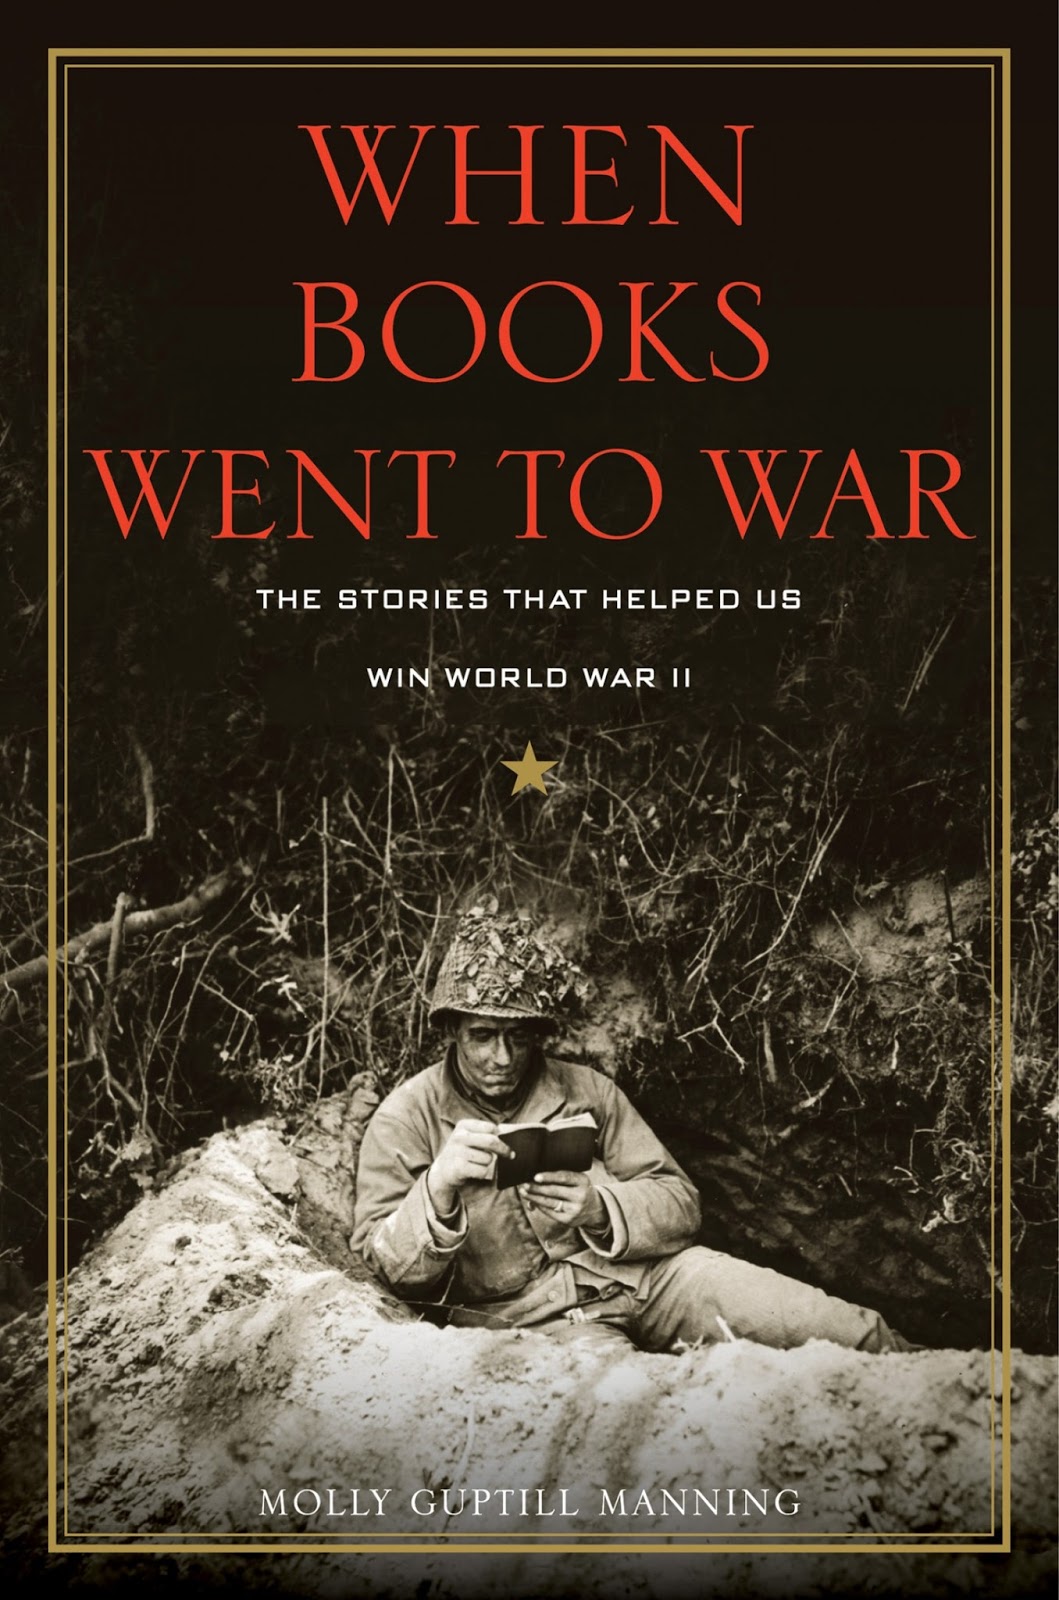 Howling Frog Books: When Books Went to War